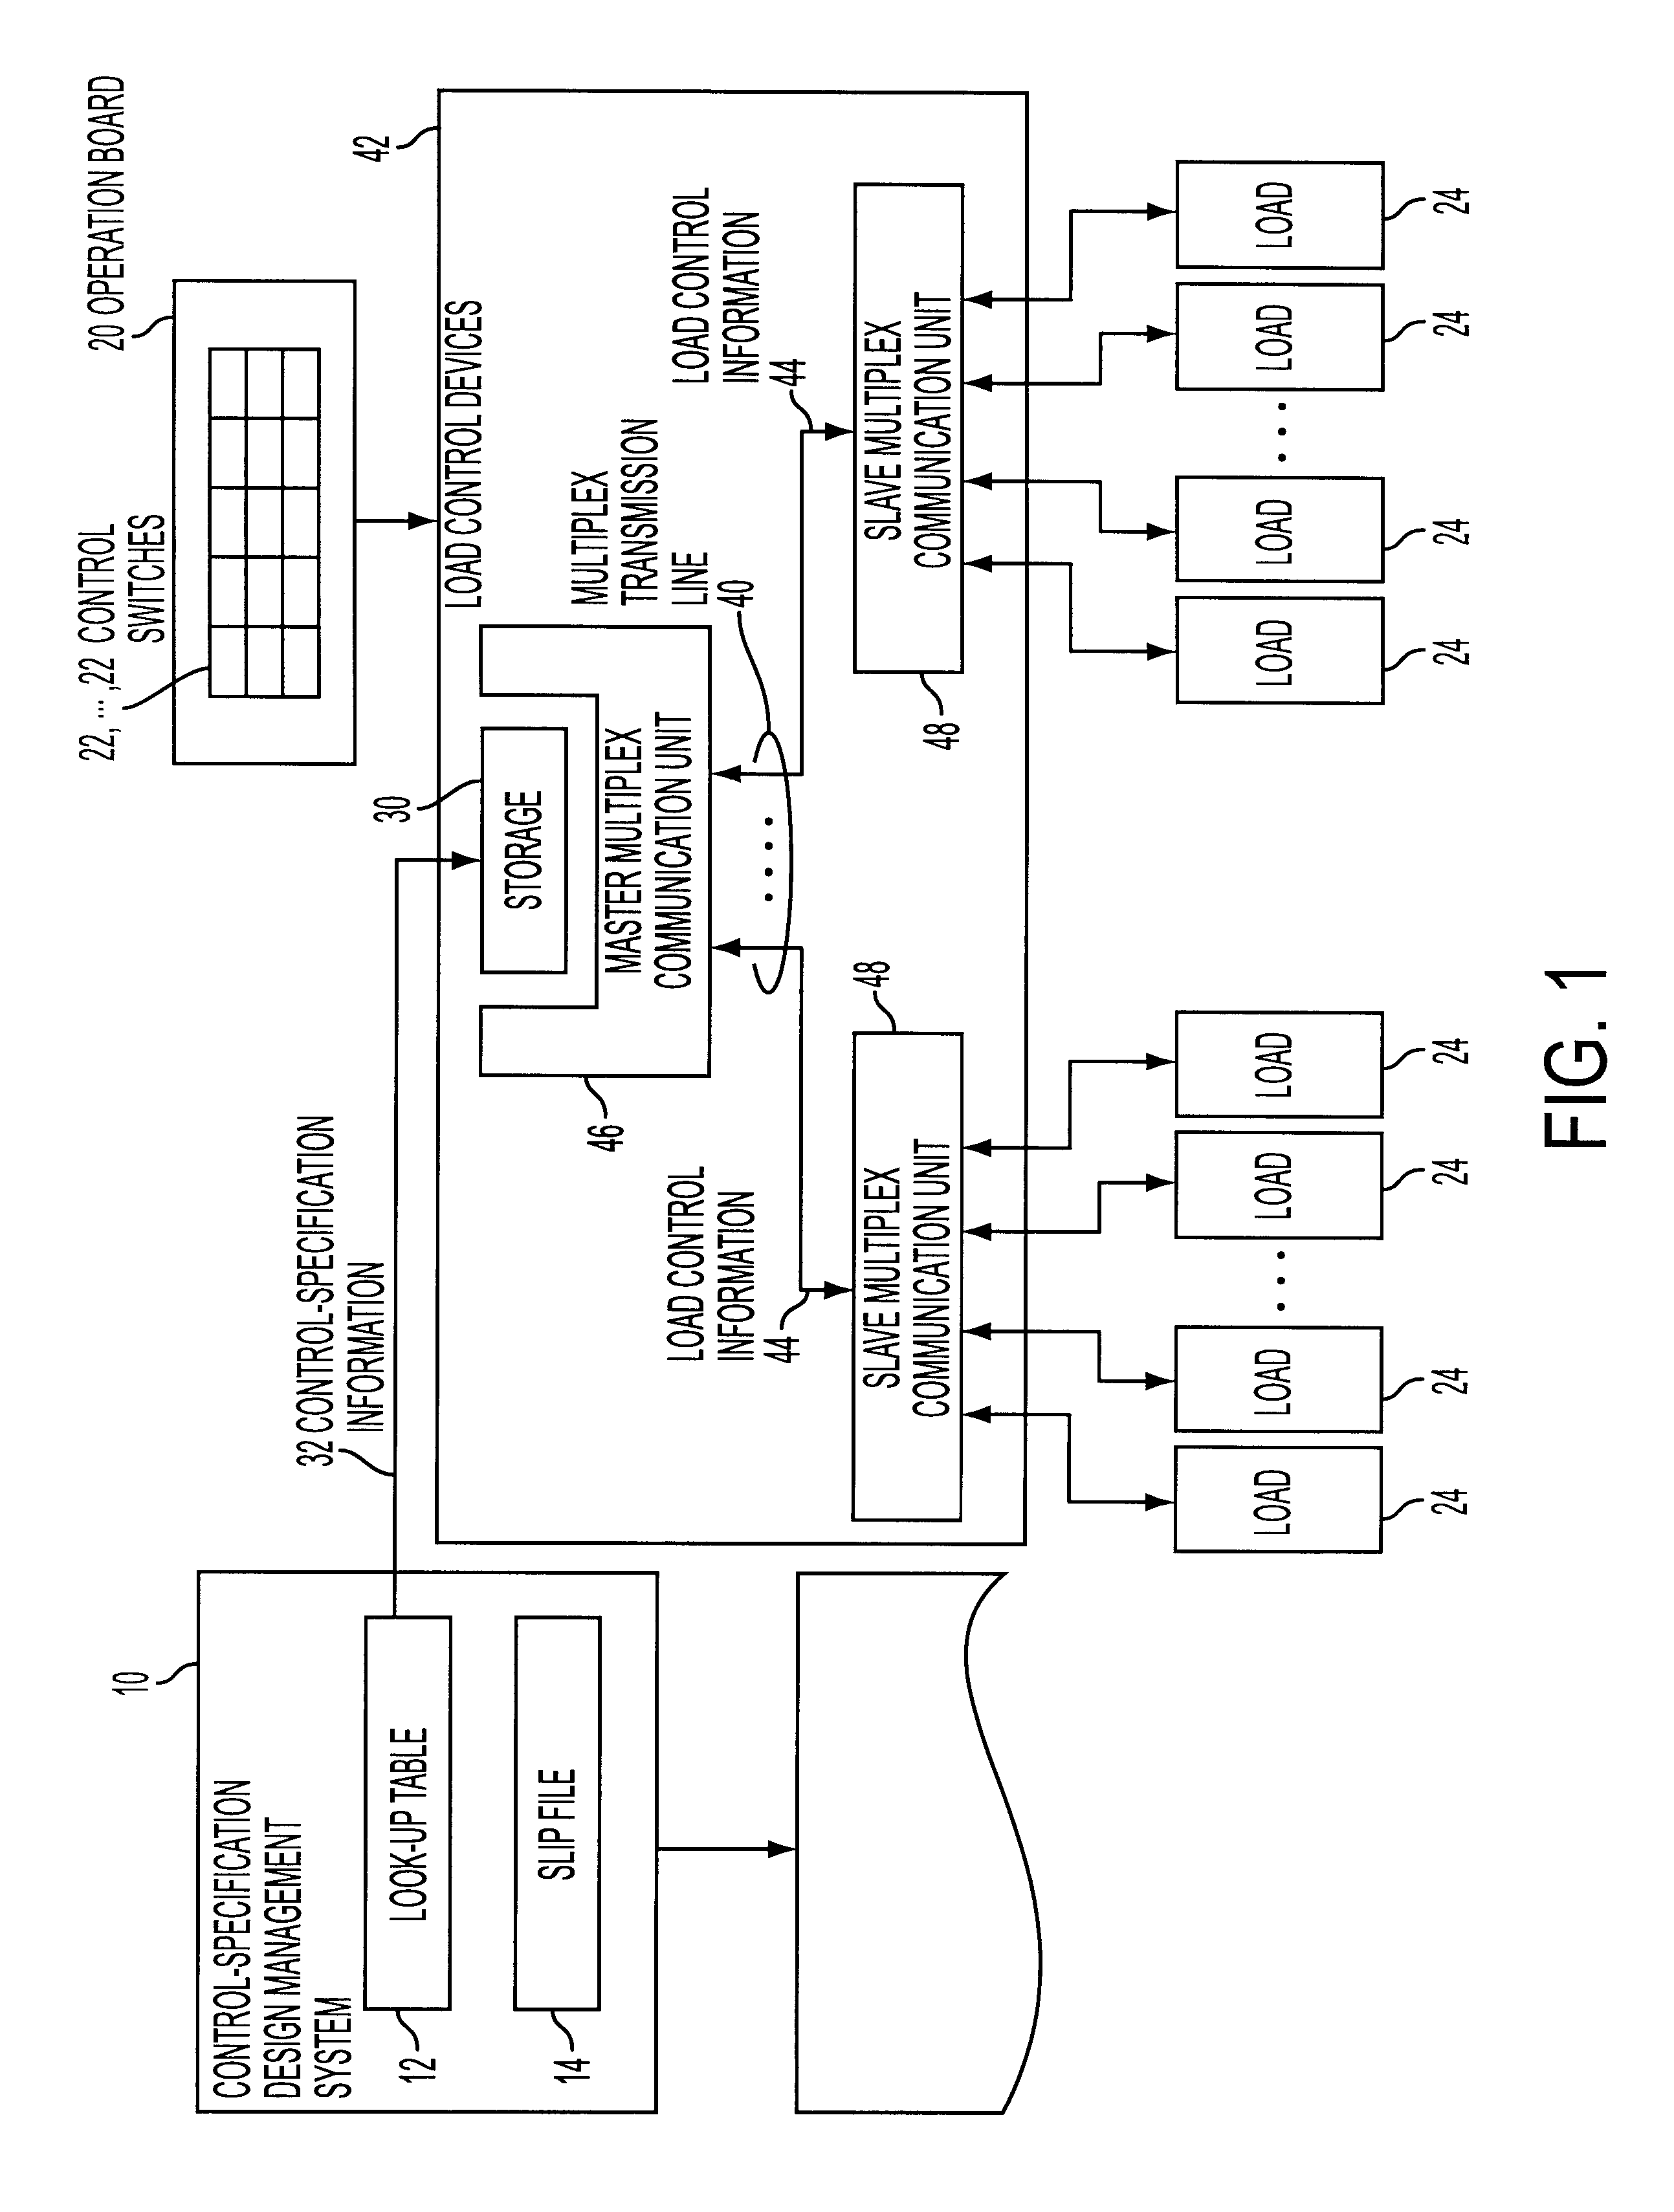 Control-specification design management system used for load control devices